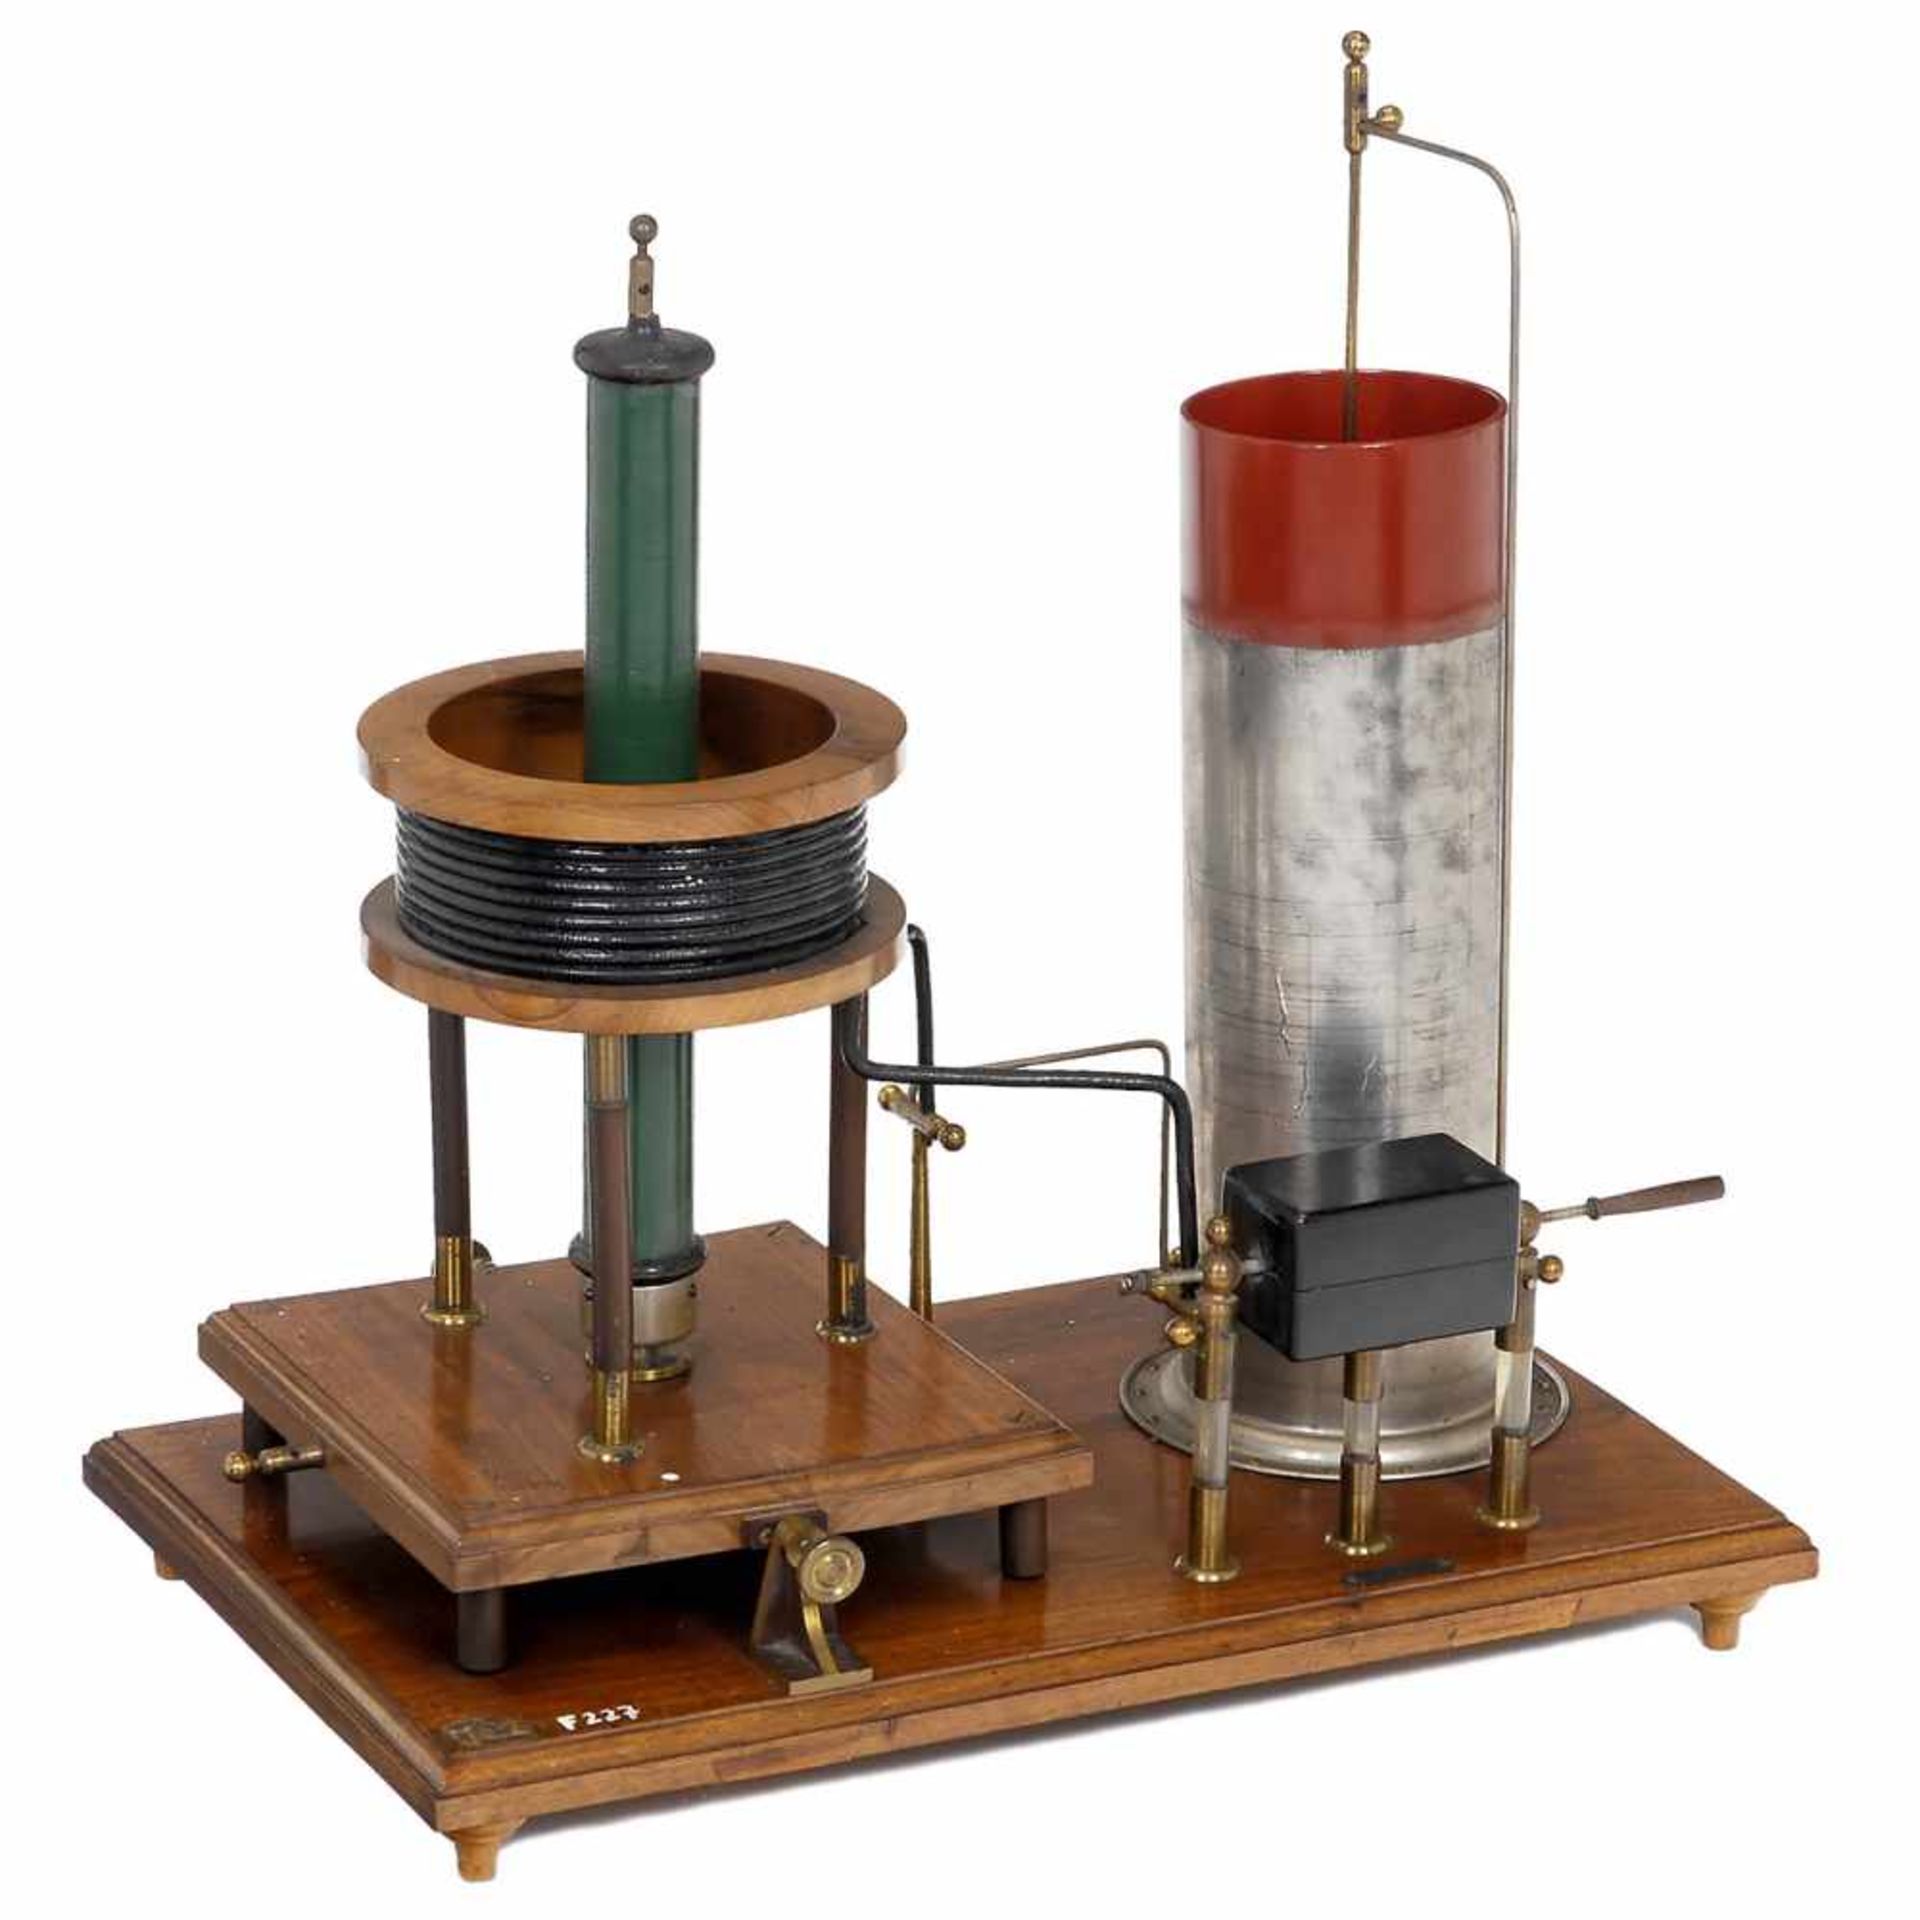 Large High-Voltage Apparatus According to Tesla, c. 1920Demonstration model, used in physics for